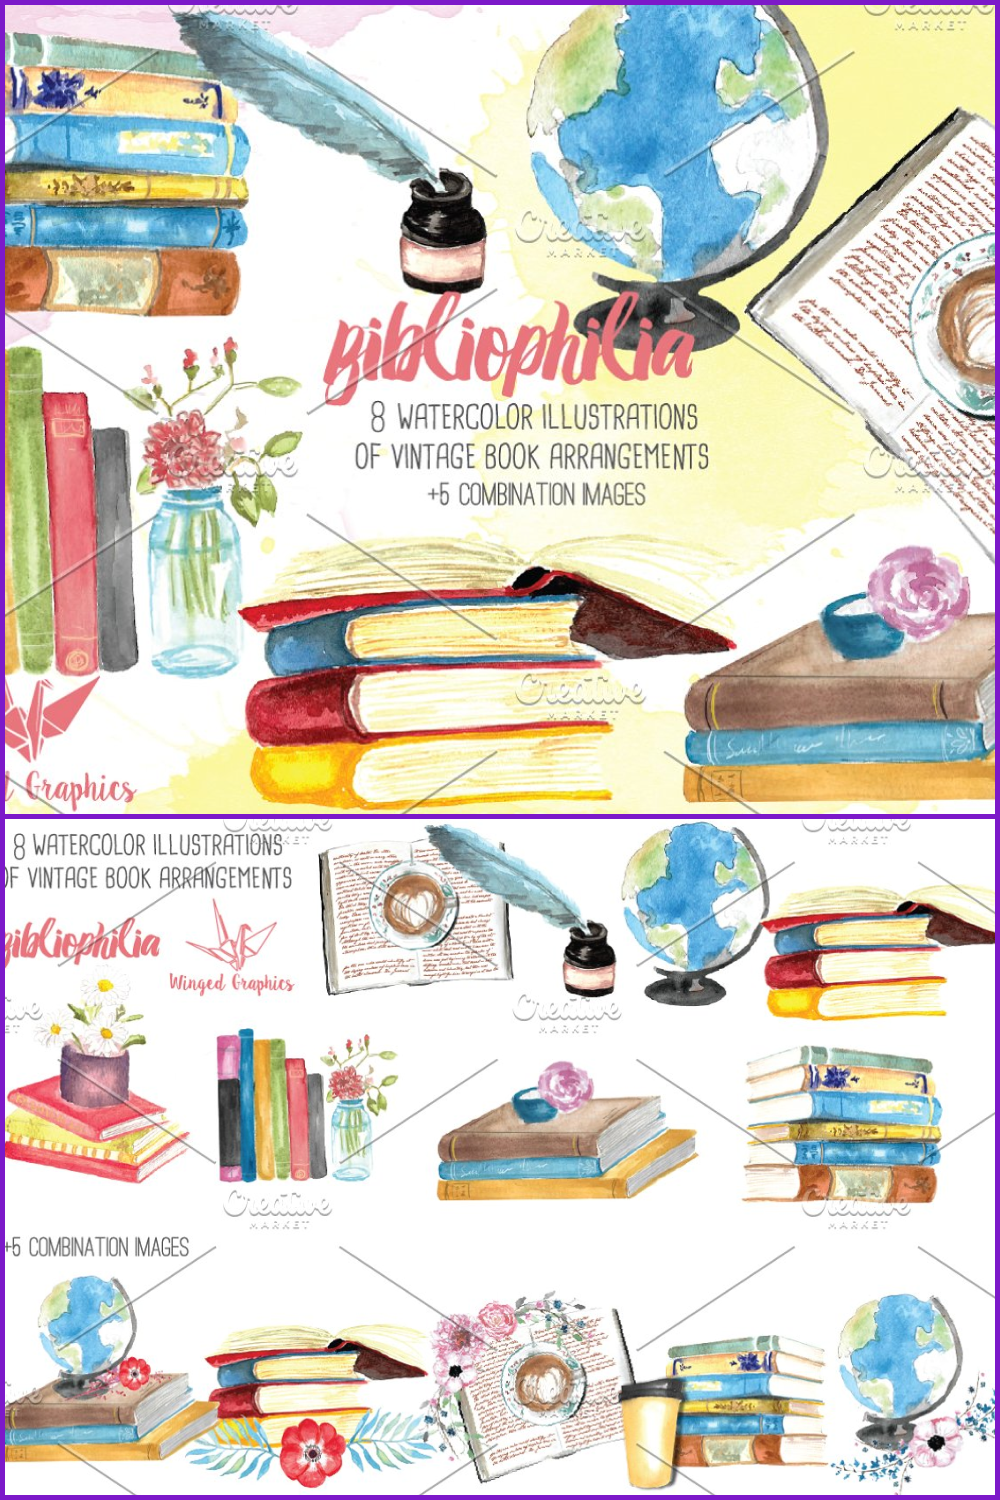 A collage of watercolor-drawn books with colorful covers, a globe and a vase of flowers.